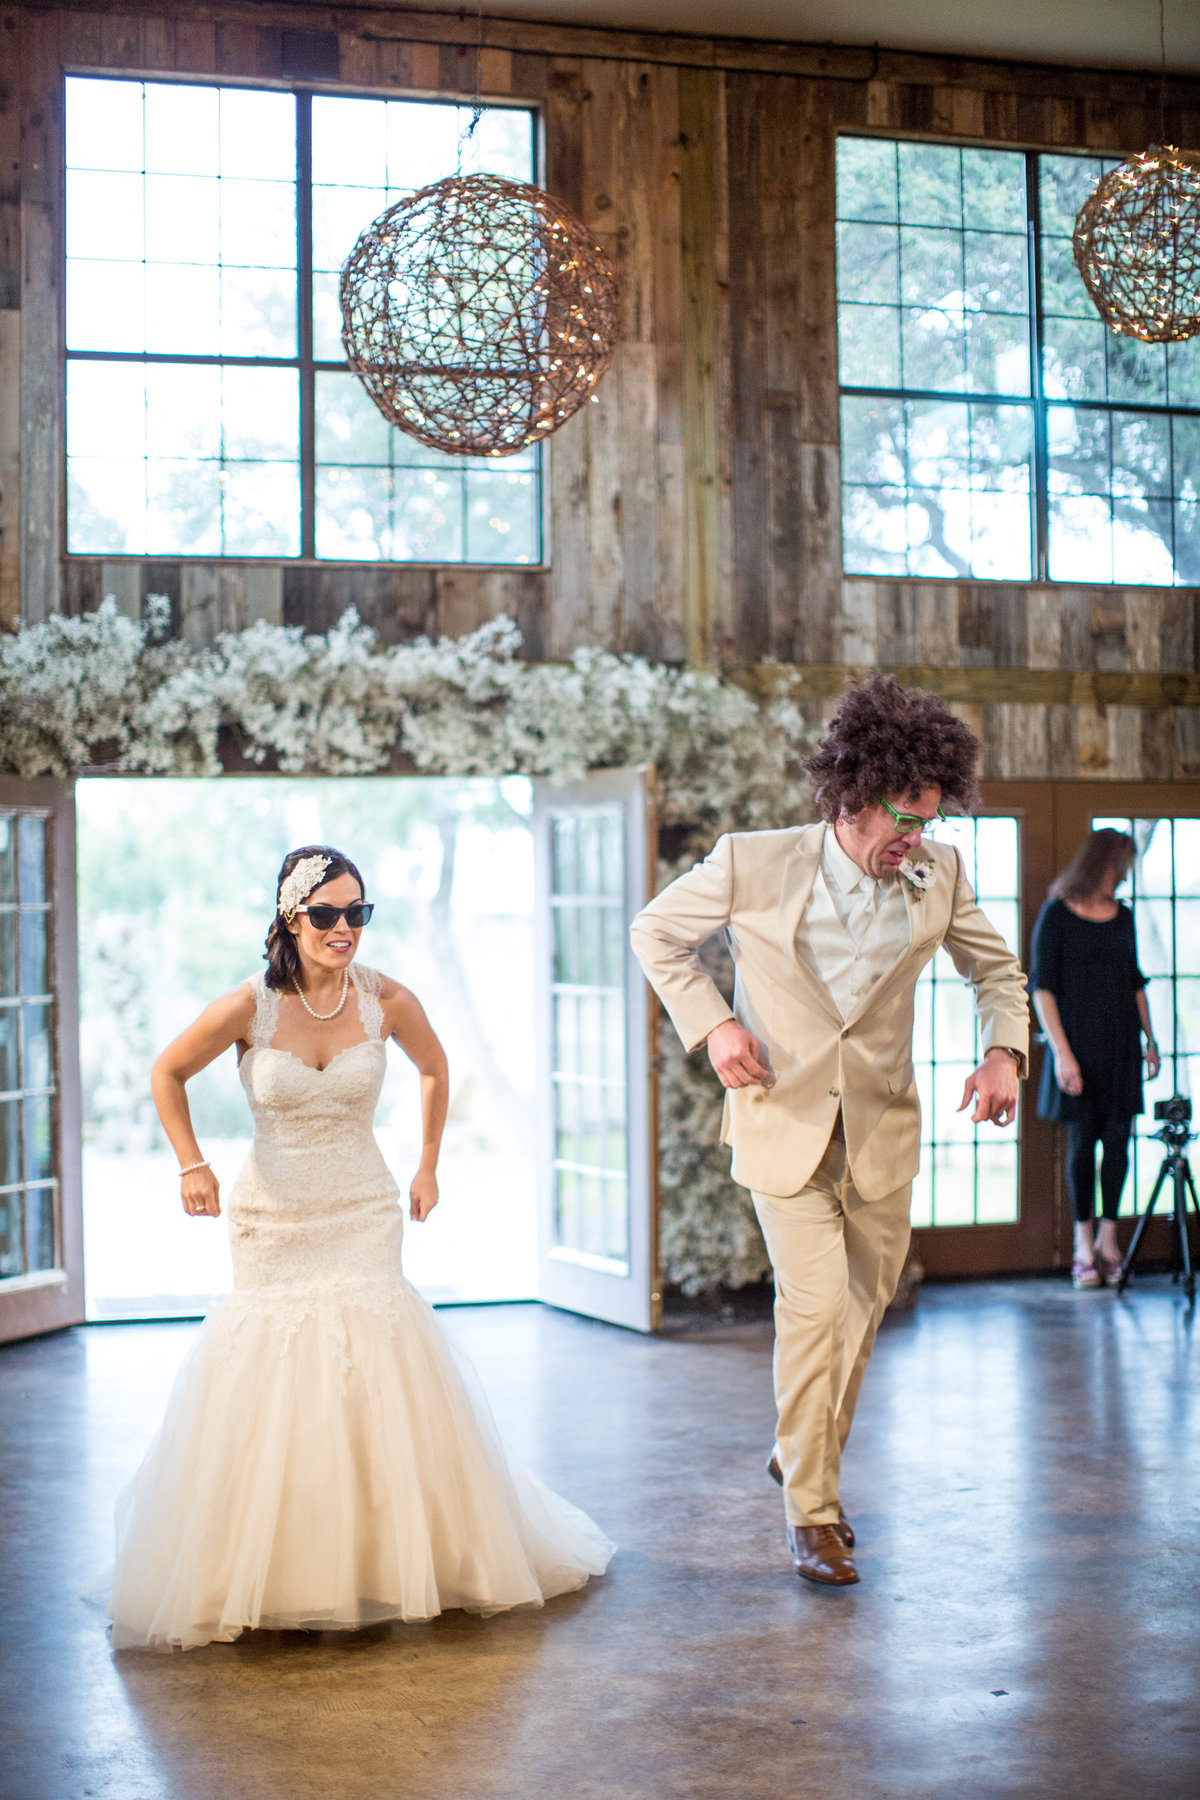 couple dancing to LMFAO for the wedding grand entrance at Vista West Ranch wedding venue